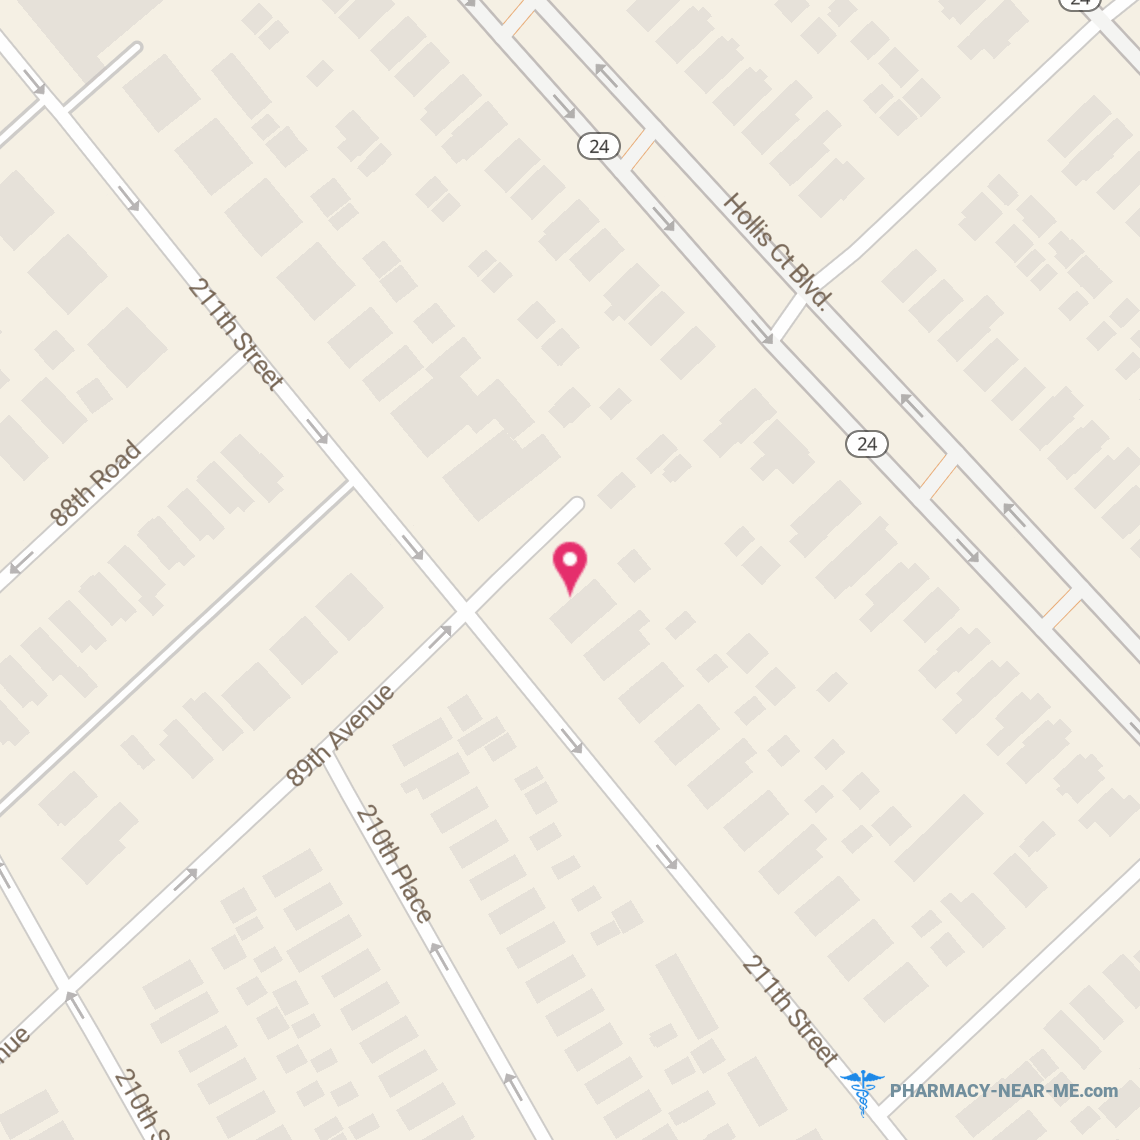 CVS PHARMACY - Pharmacy Hours, Phone, Reviews & Information: 219-39 89th Avenue, Queens, New York 11427, United States